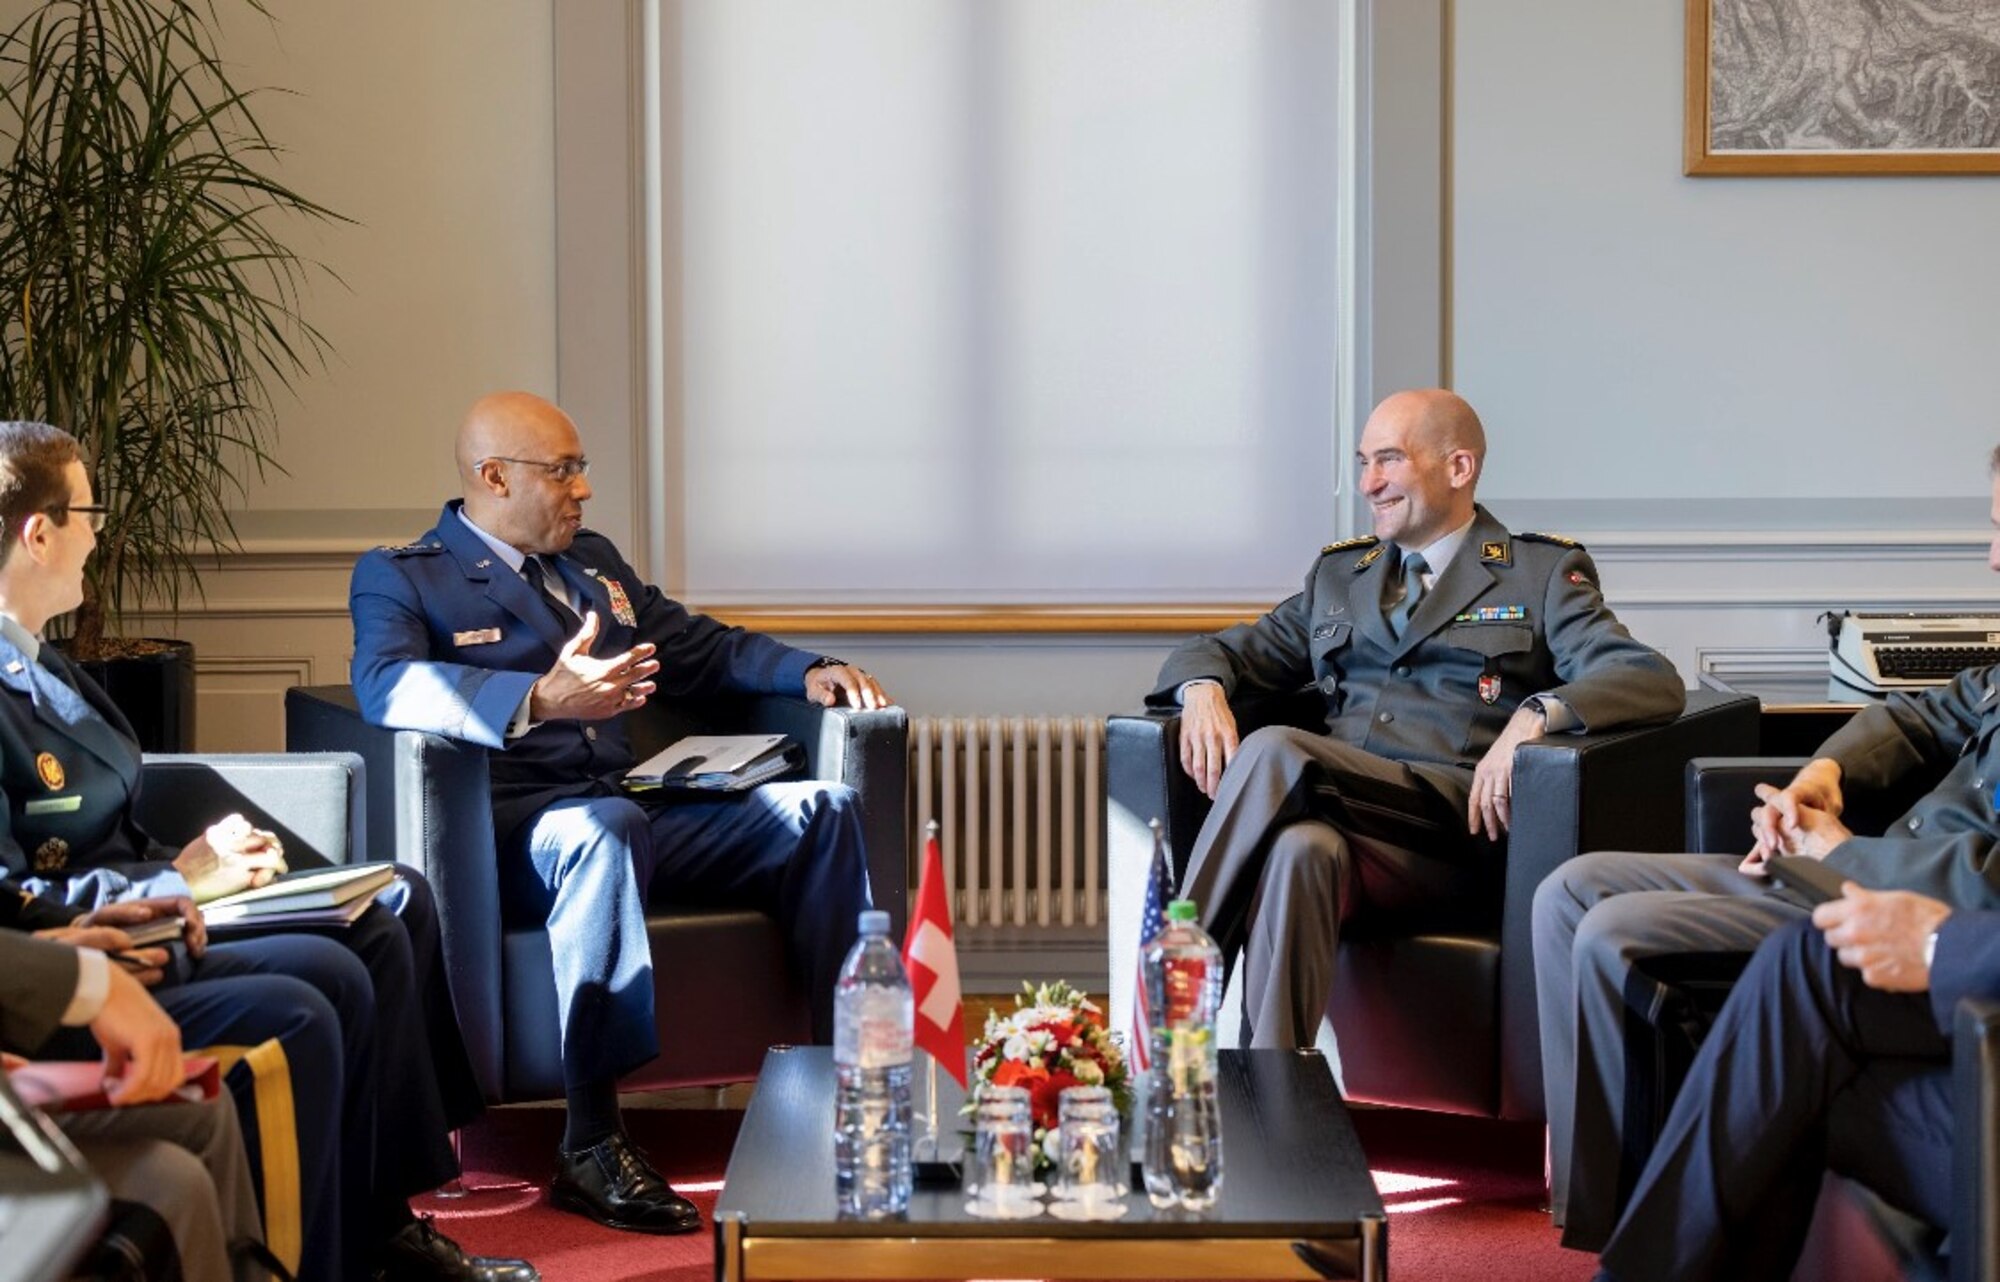 Air Force Chief of Staff Gen. CQ Brown, Jr., traveled to Switzerland March 12-15. The scheduled visit highlighted the U.S. Air Force’s commitment to the U.S.-Switzerland bilateral defense partnership and regional security in Europe. (Courtesy photo)